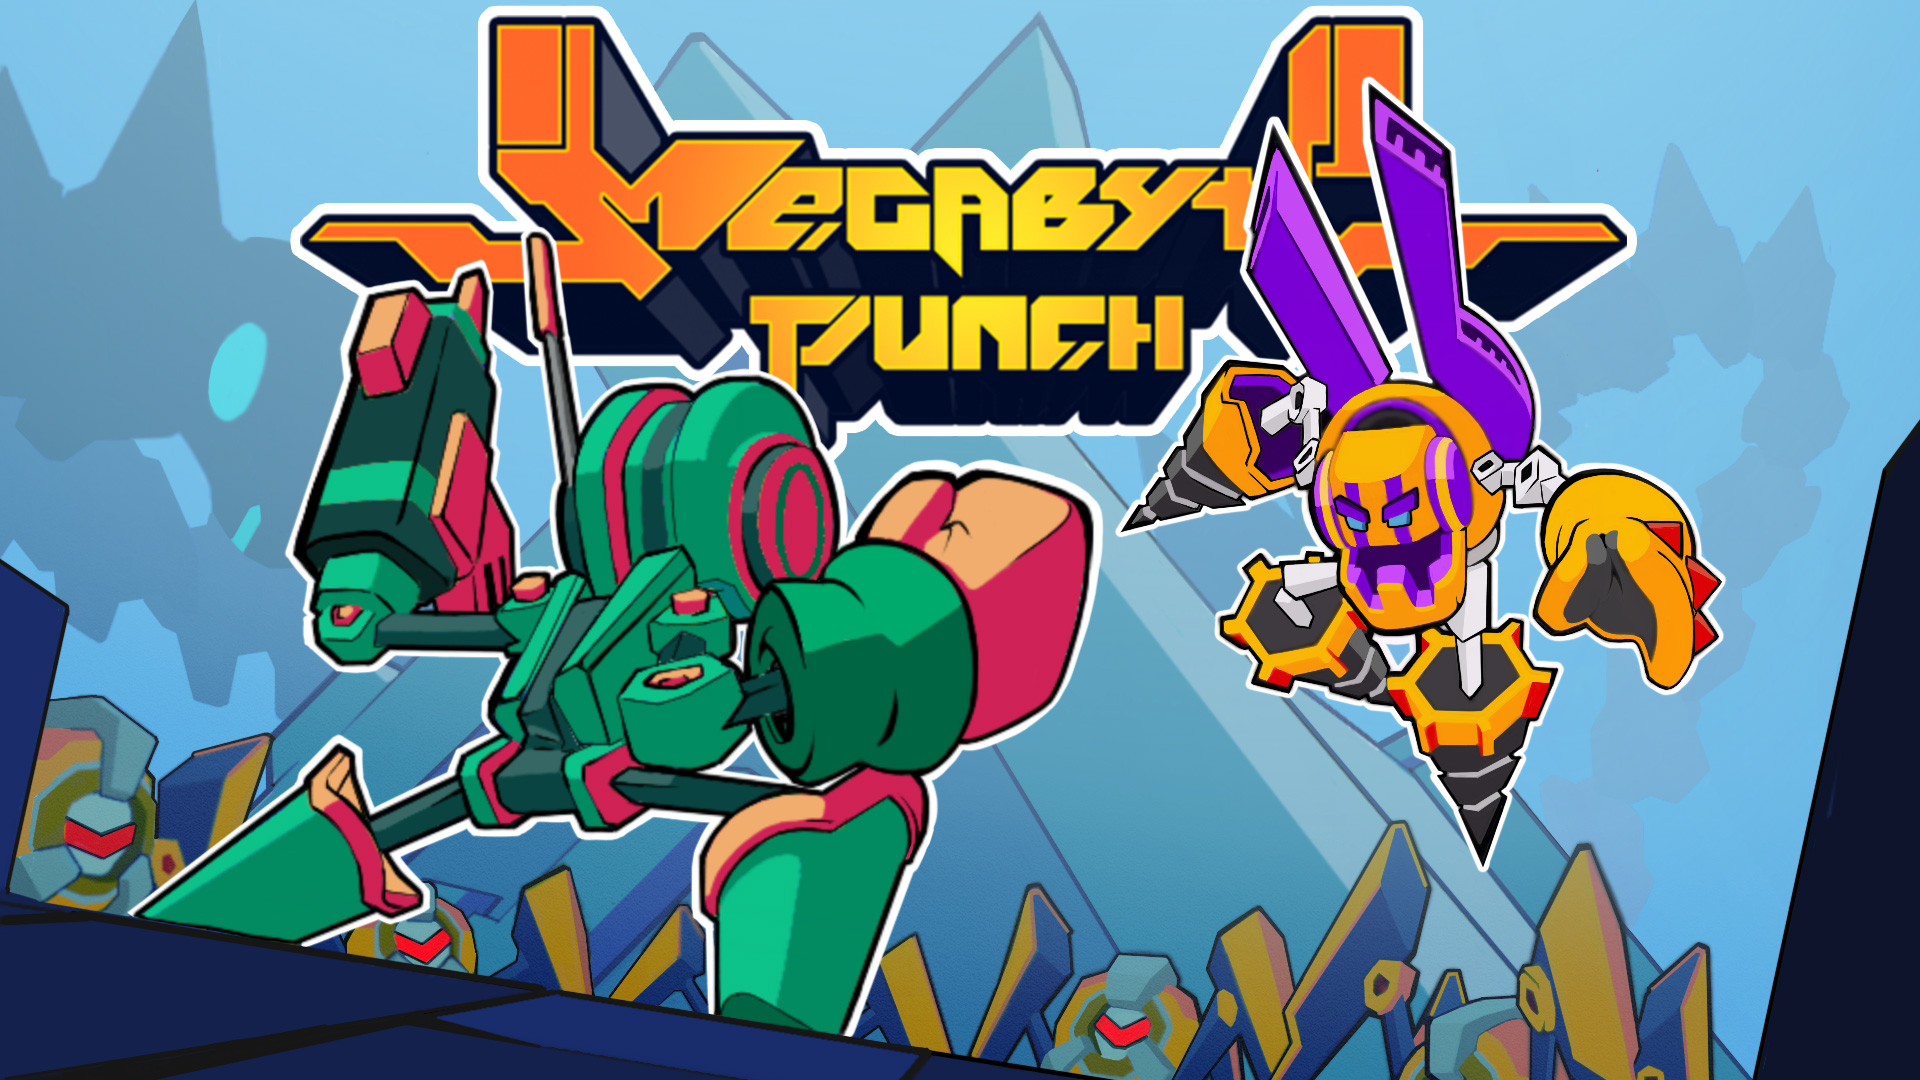 Megabyte Punch Is Coming To The Nintendo Switch With Some Robot Fighting Action For A Whole New Audience